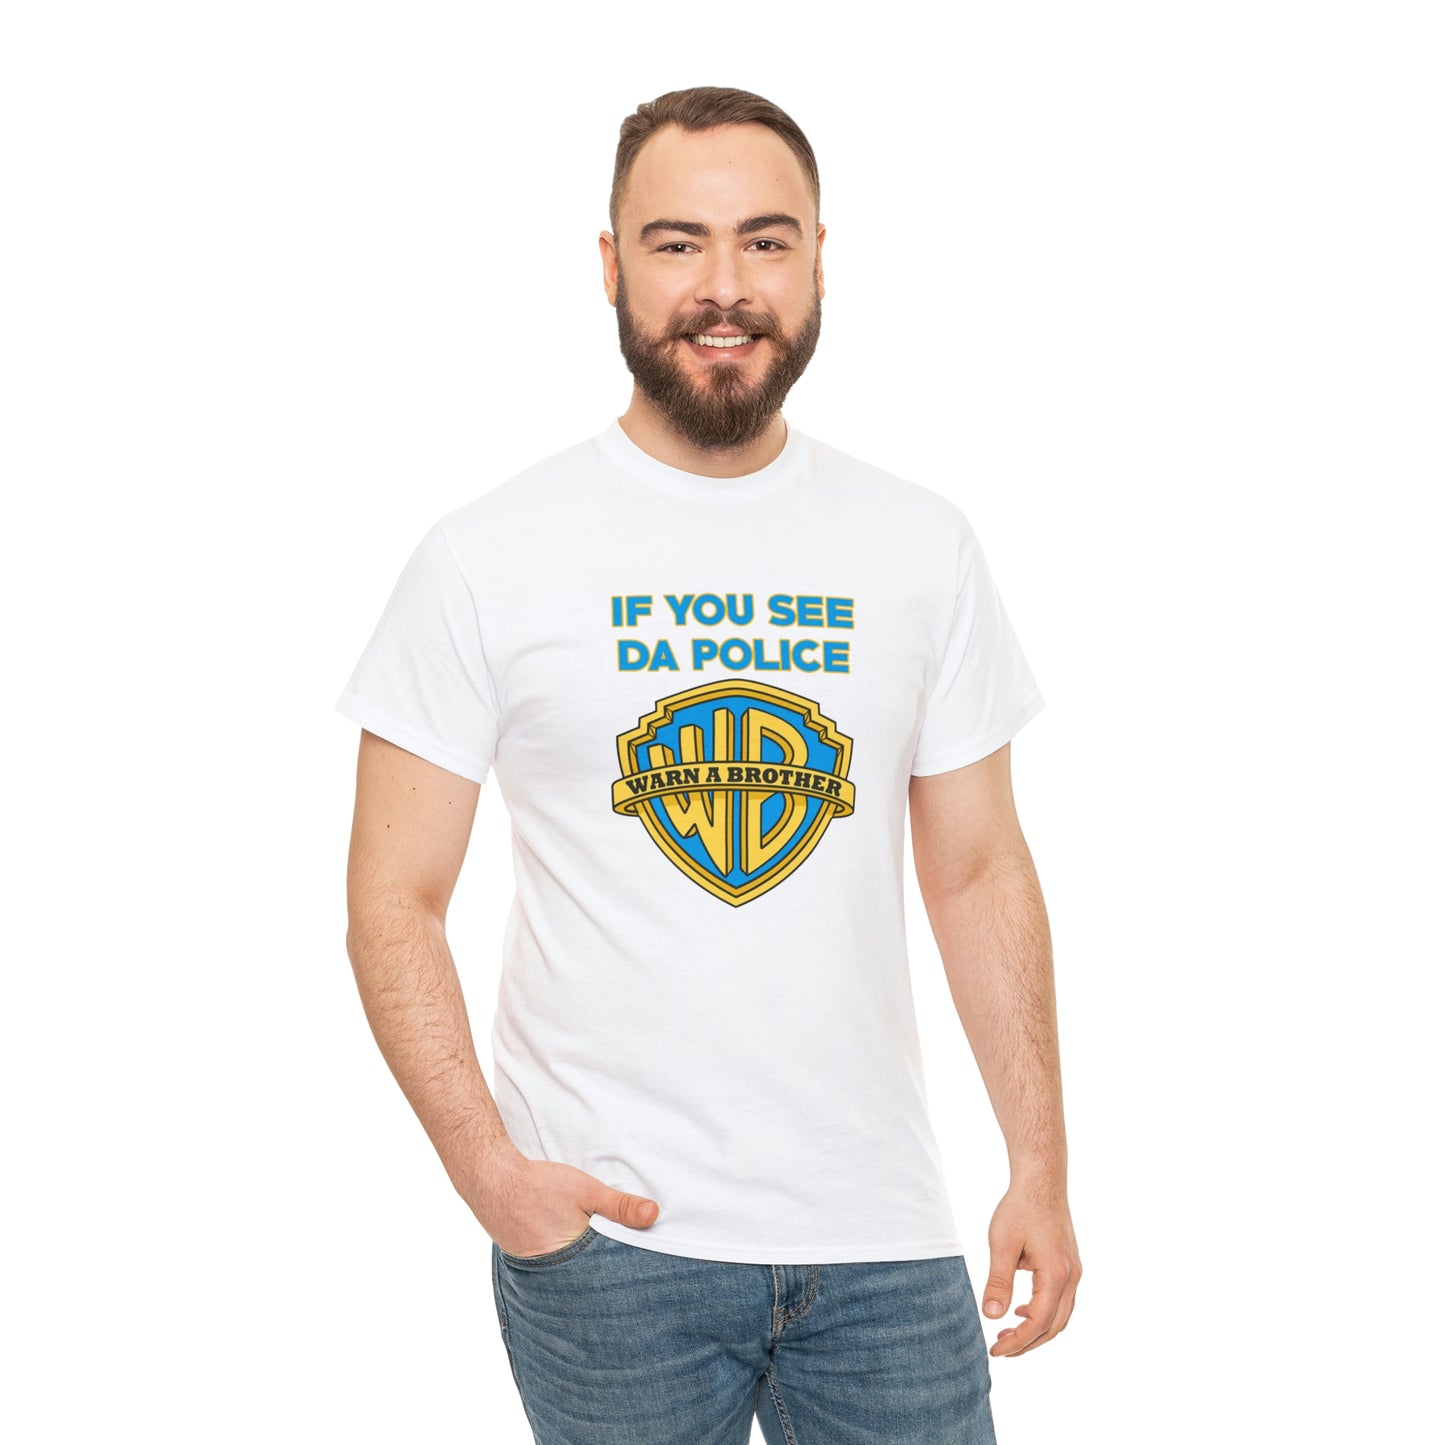 WARN A BROTHER T-SHIRT